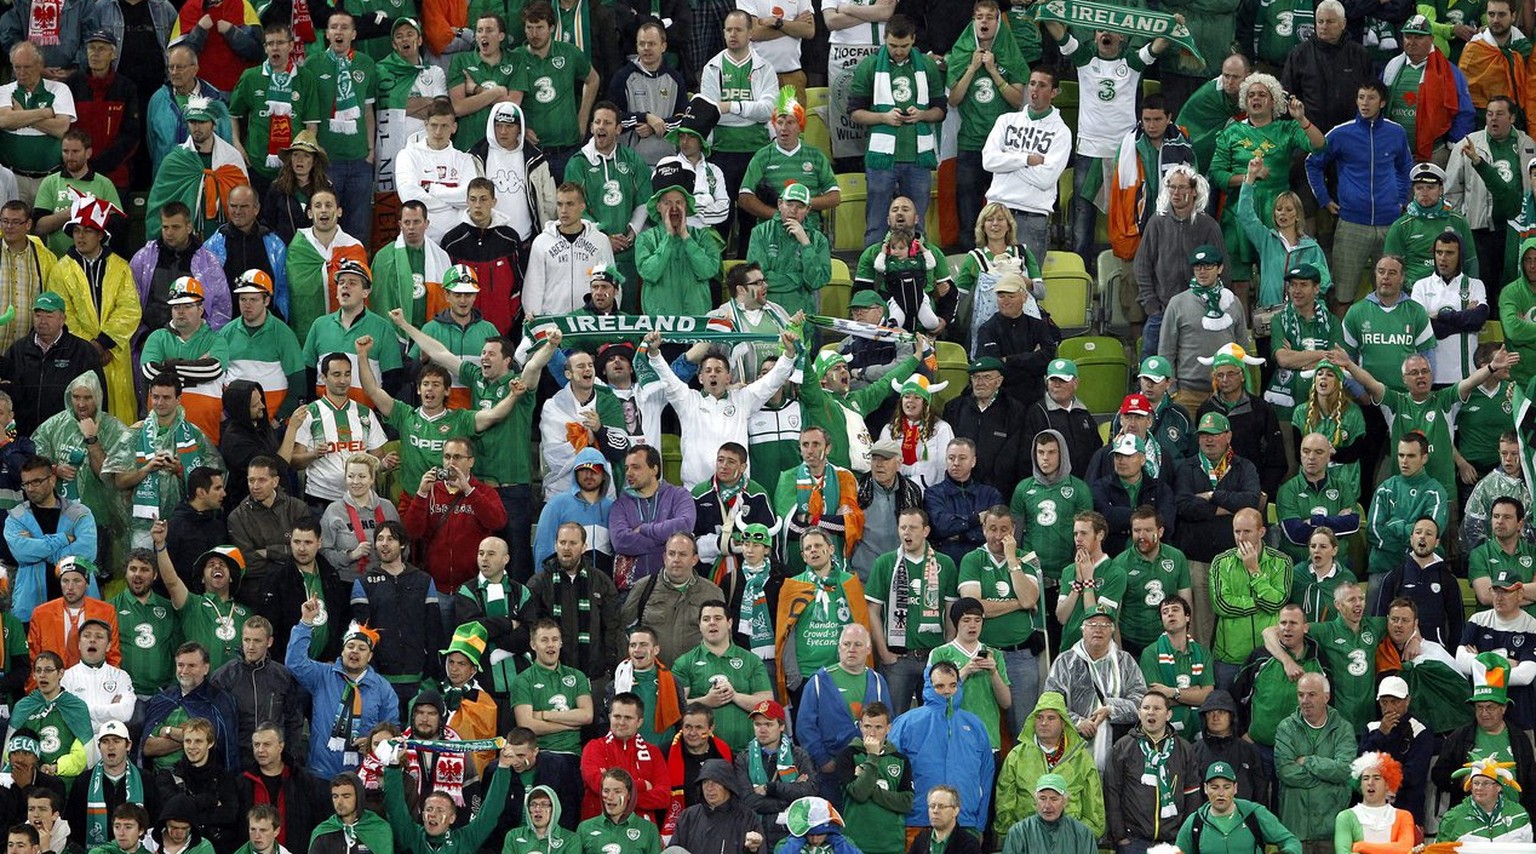 epa03266715 Irish fans pictured during the Group C preliminary round match of the UEFA EURO 2012 between Spain and Ireland in Gdansk, Poland, 14 June 2012. EPA/KAMIL KRZACZYNSKI UEFA Terms and Conditi ...